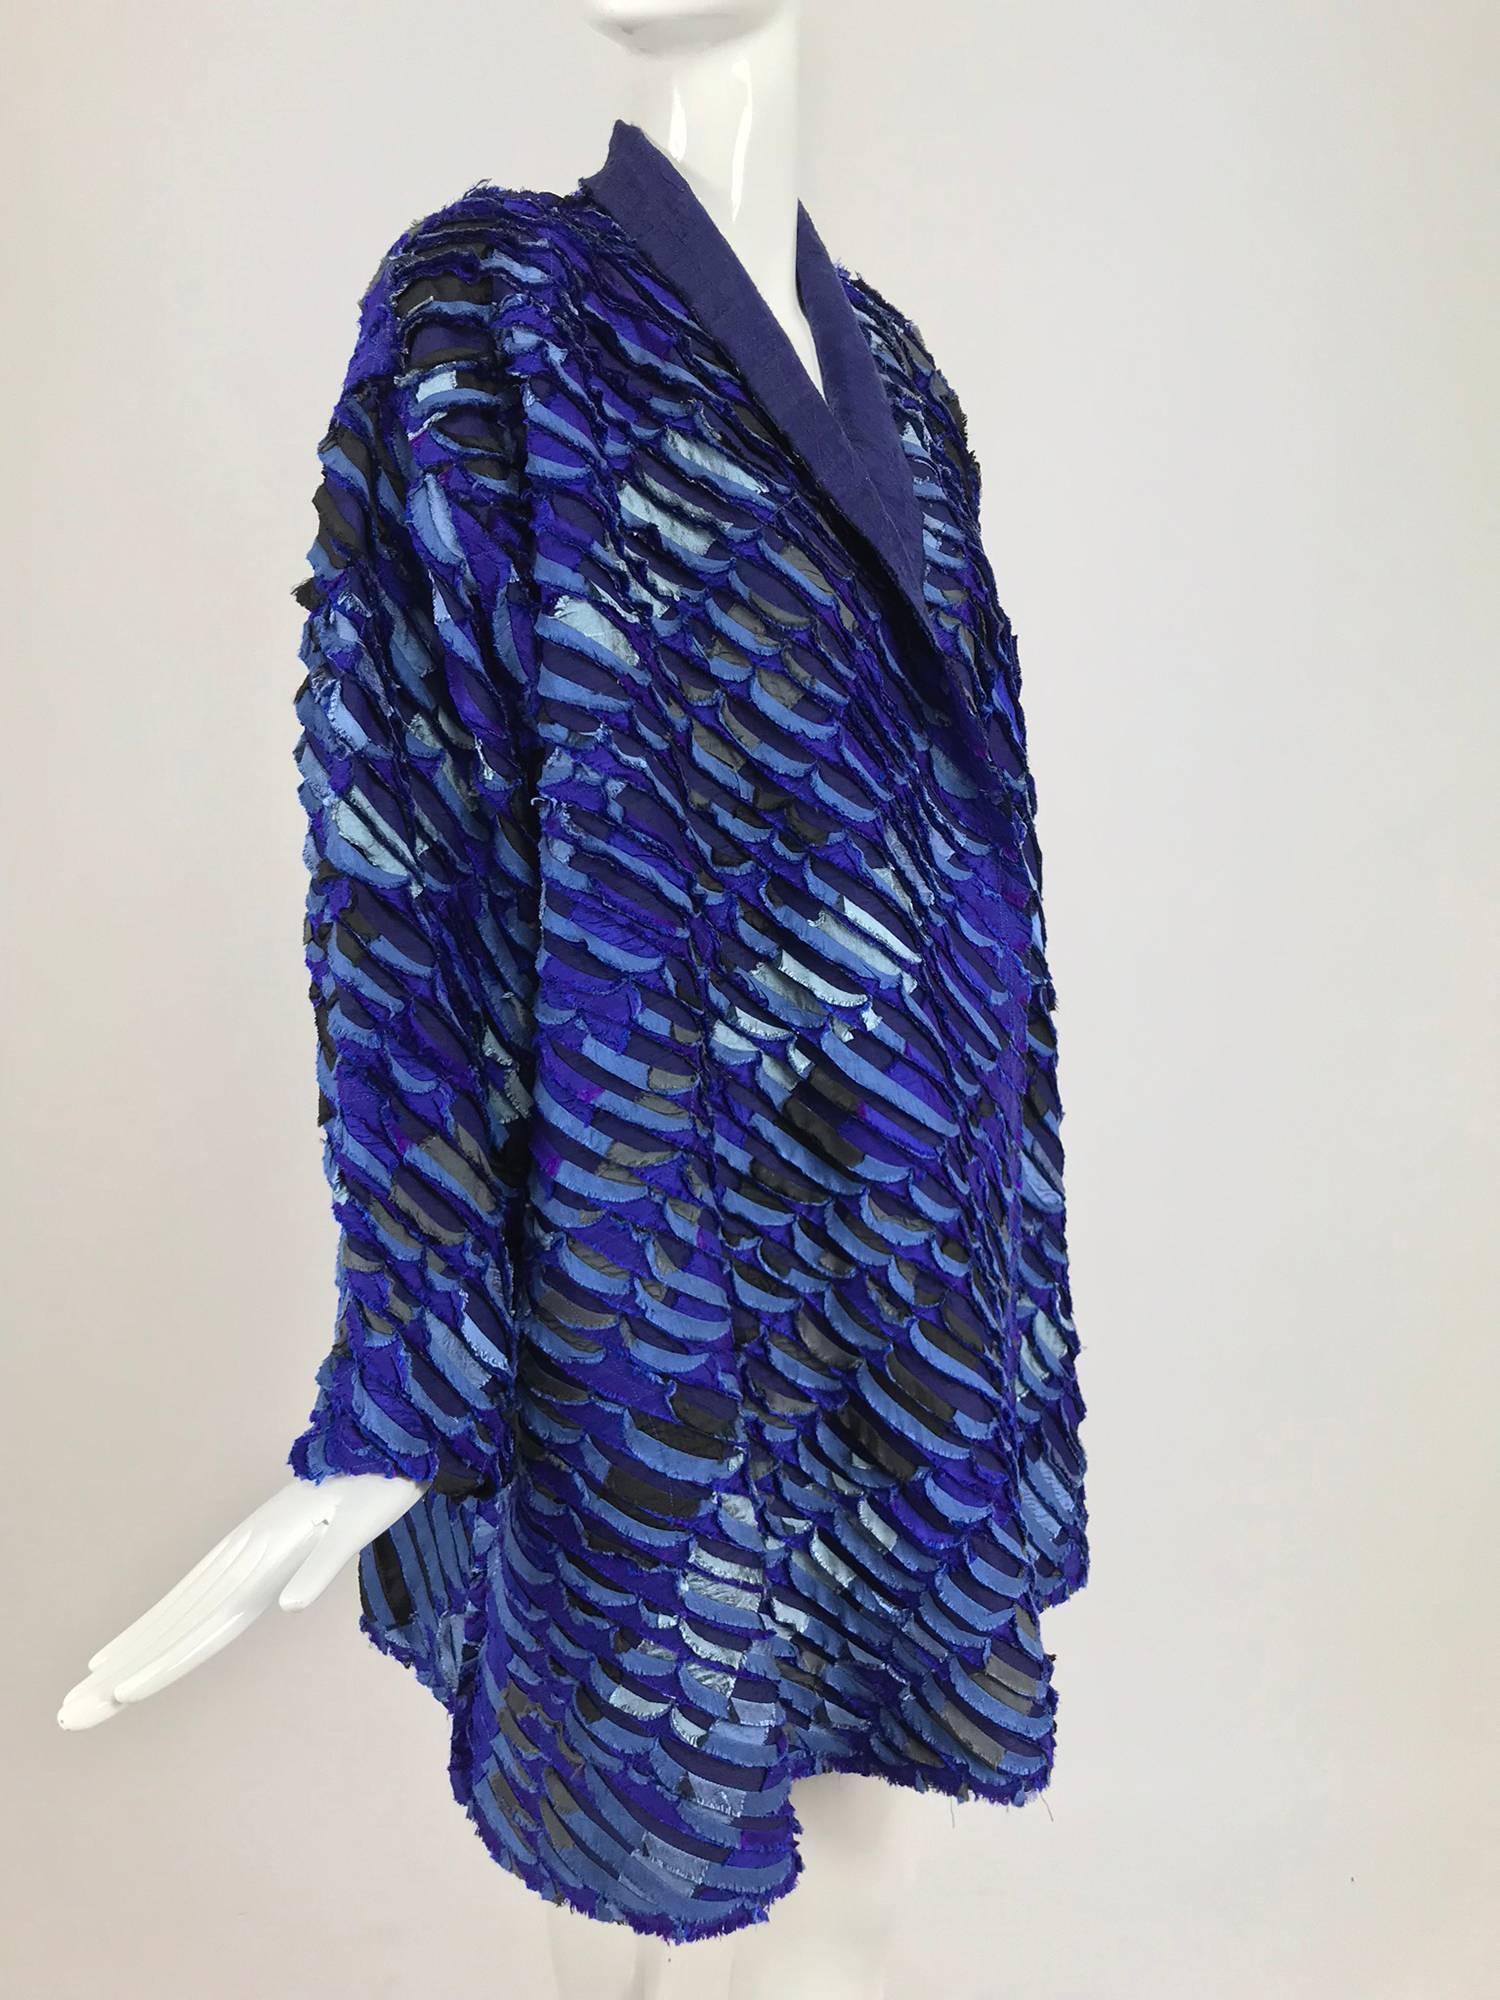 Tim Harding Art to Wear French Blue raw silk swing coat...Tim Harding is a highly regarded and award winning textile artist his work can be found in the collection of many museums, corporations including The Smithsonian American Art Museum-Renwick